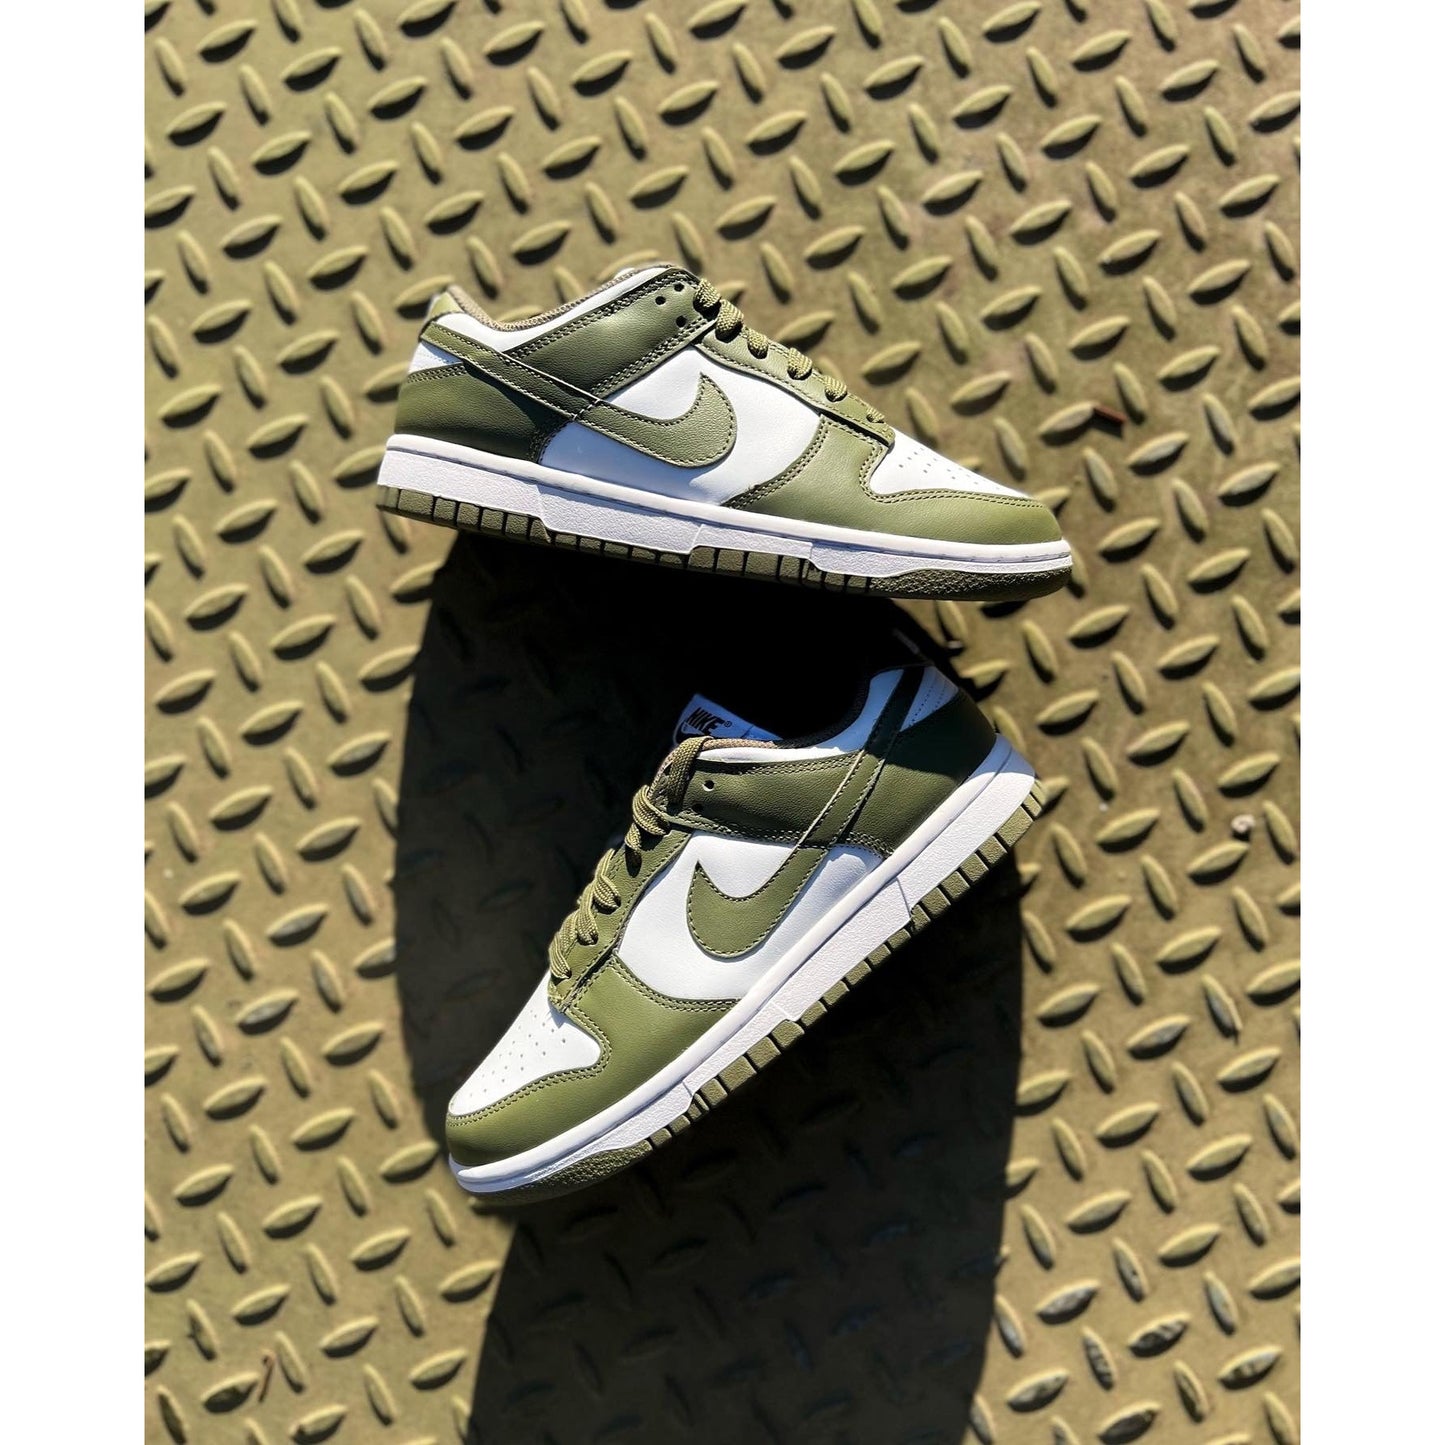 Nike Dunk Low Medium Olive (W) by Nike from £155.00